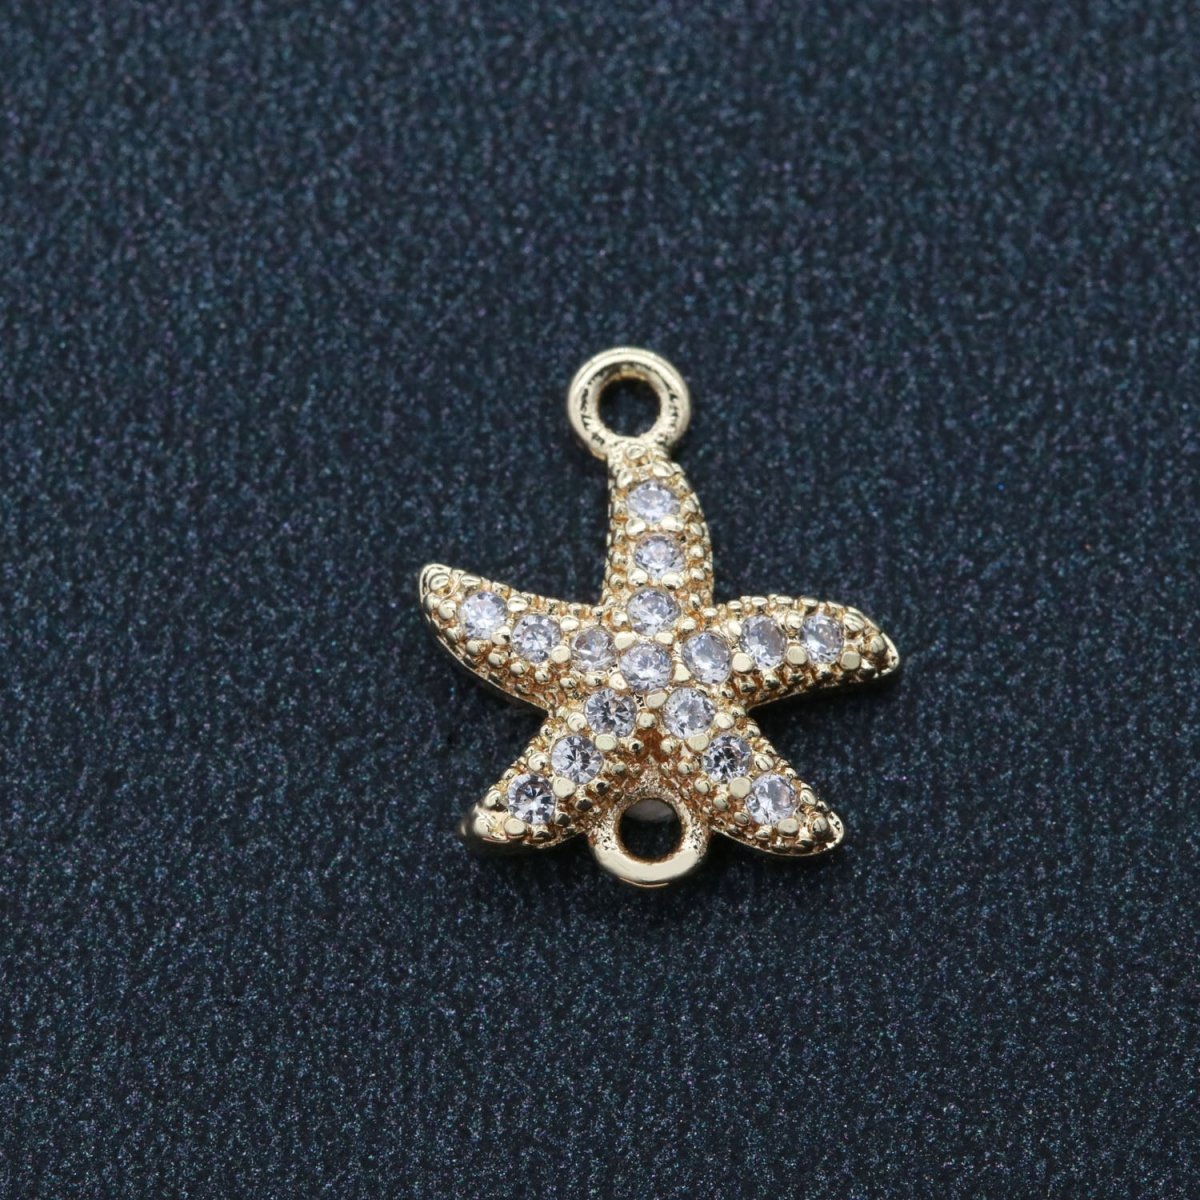 Mini Star Fish Charm Connector for Bracelet Earring Necklace Link Connector F-834 - DLUXCA